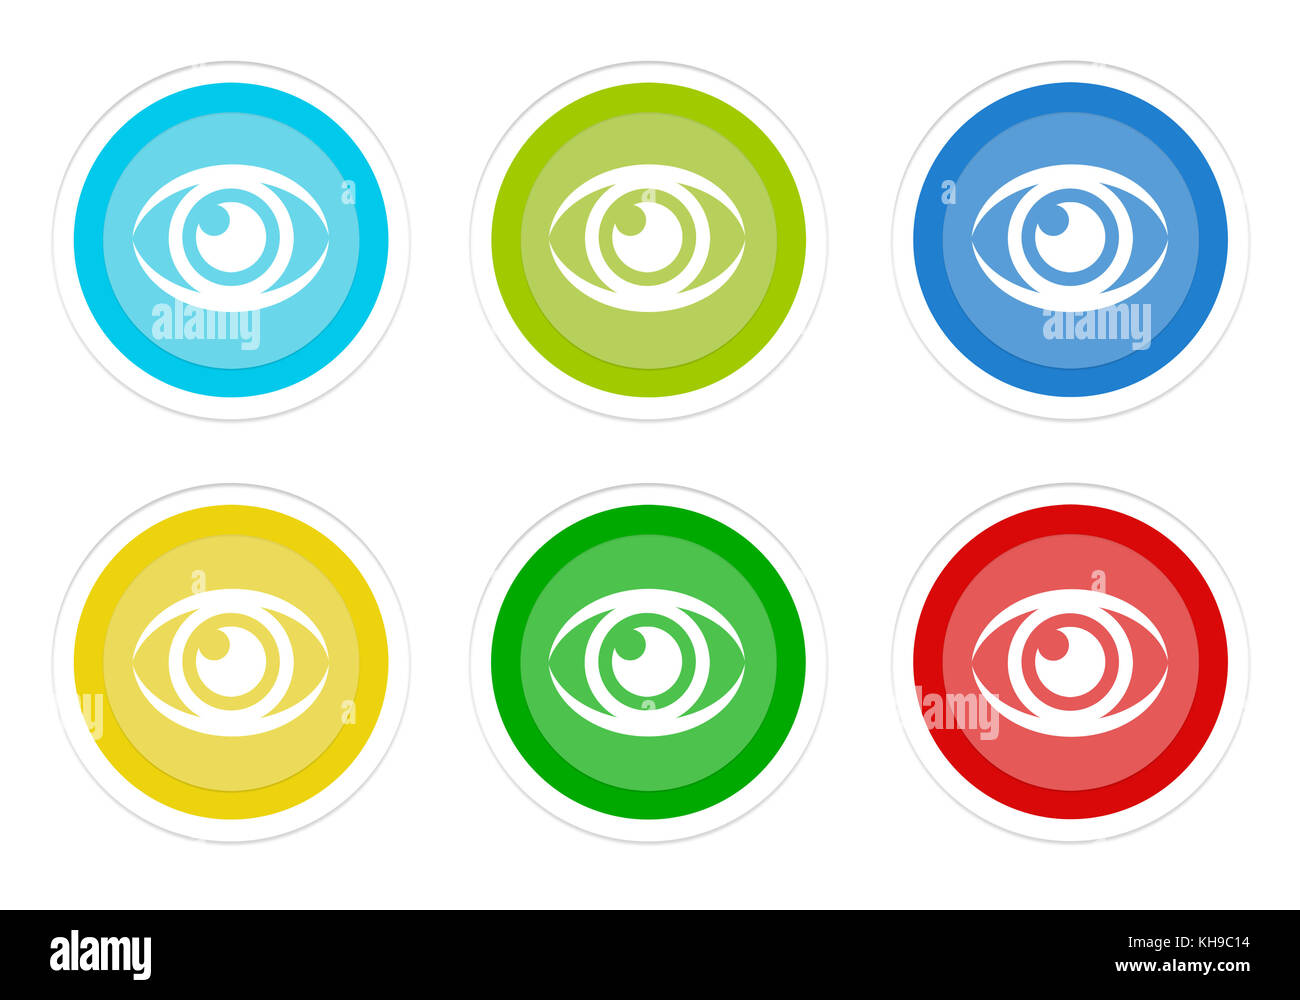 Set of rounded colorful buttons with eye symbol in blue, green, yellow ...